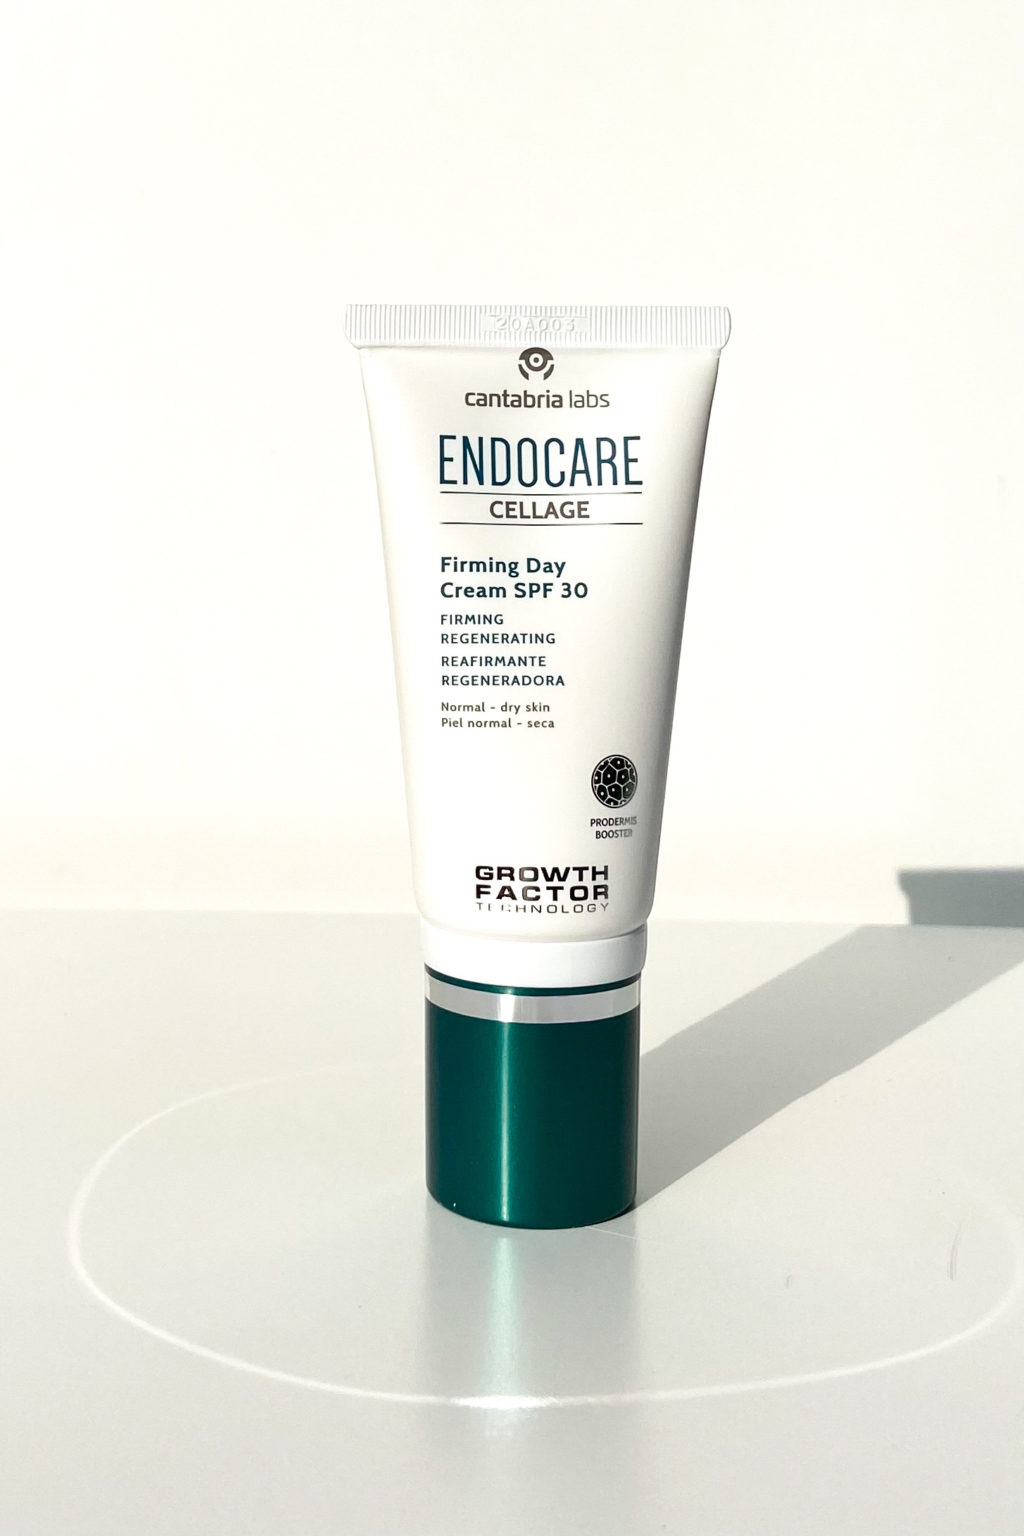 Endocare Cellage Firming Day Cream SPF 30 50 Ml